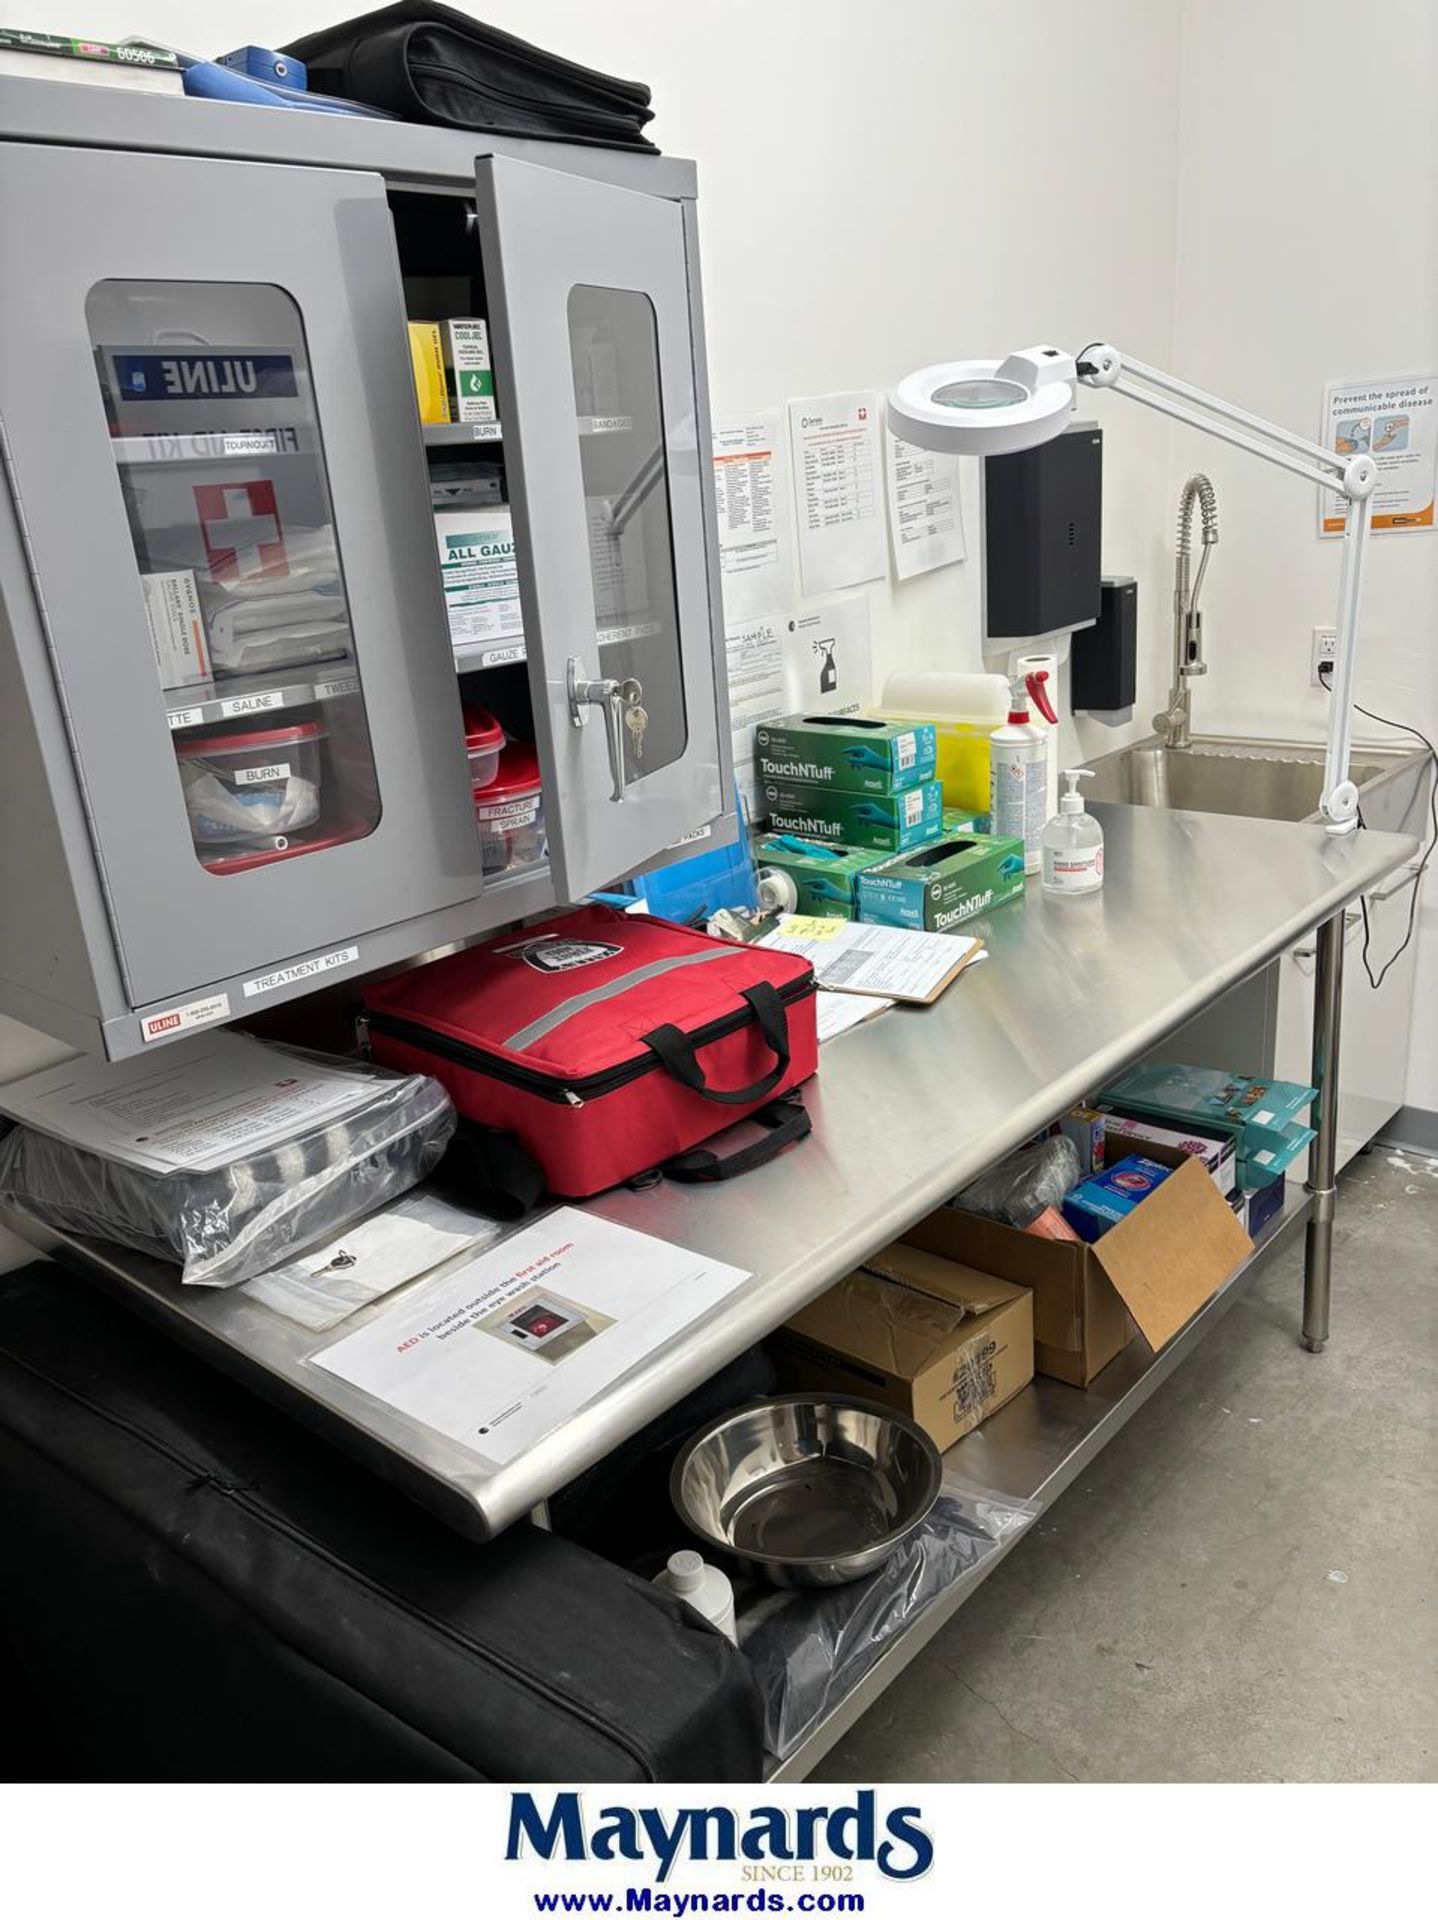 Contents of first aid room